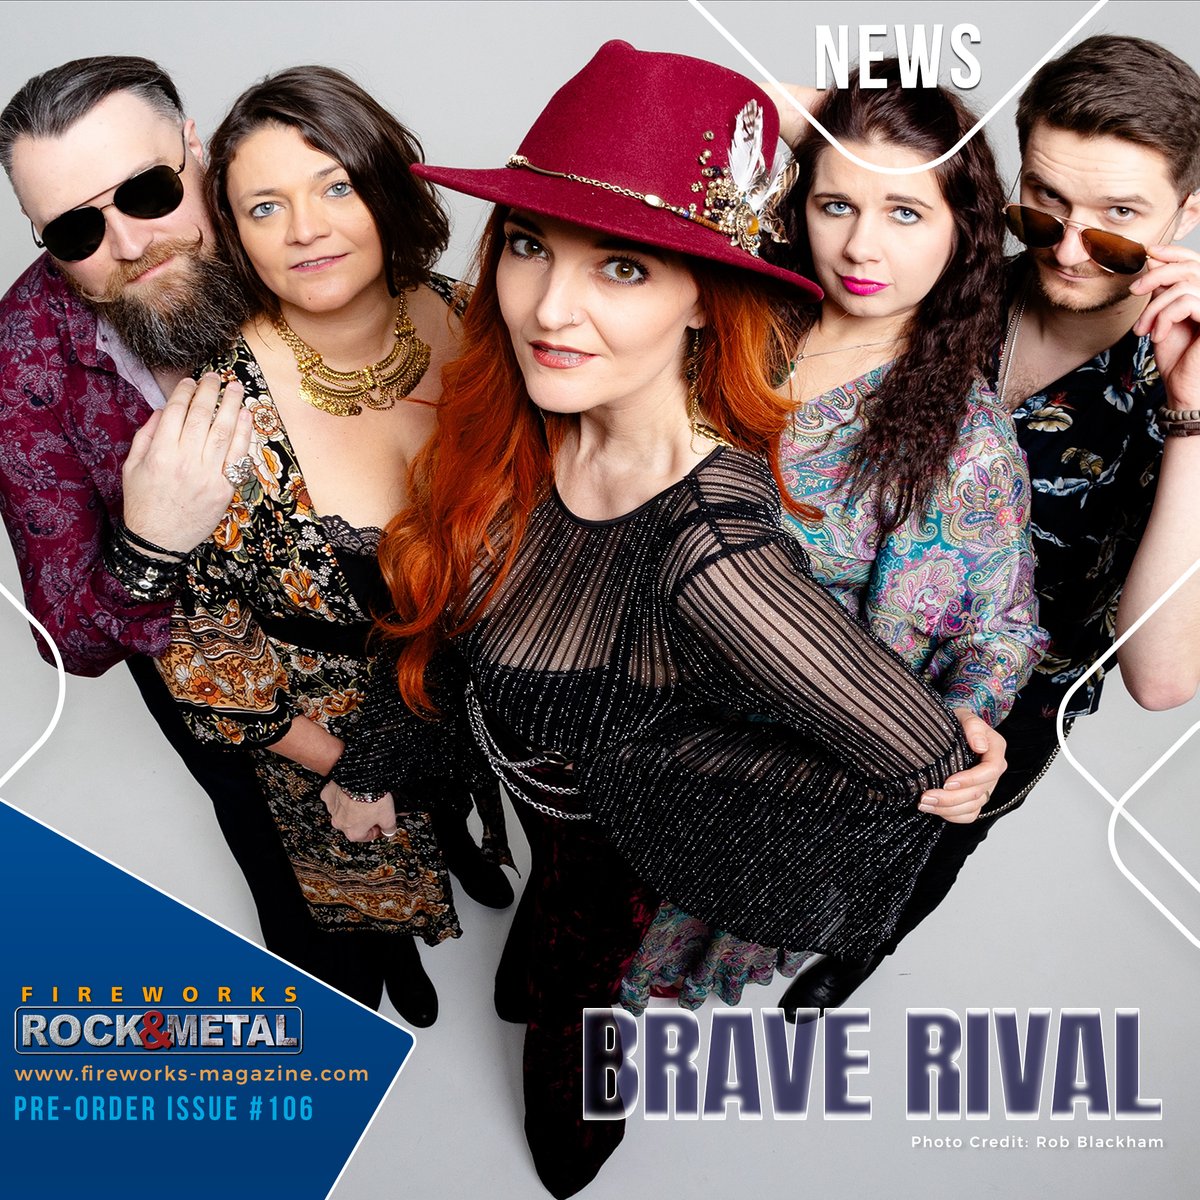 𝗖𝗢𝗢𝗟! Brave Rival Announce New Album Fight or Flight Set for a Summer Release. 𝘙𝘦𝘢𝘥 𝘢𝘣𝘰𝘶𝘵 𝘪𝘵 𝘩𝘦𝘳𝘦: wix.to/vEBE15N @BraveRivalBand @CentralpressPR -- PRE-ORDER Issue #106 from fireworks-magazine.com